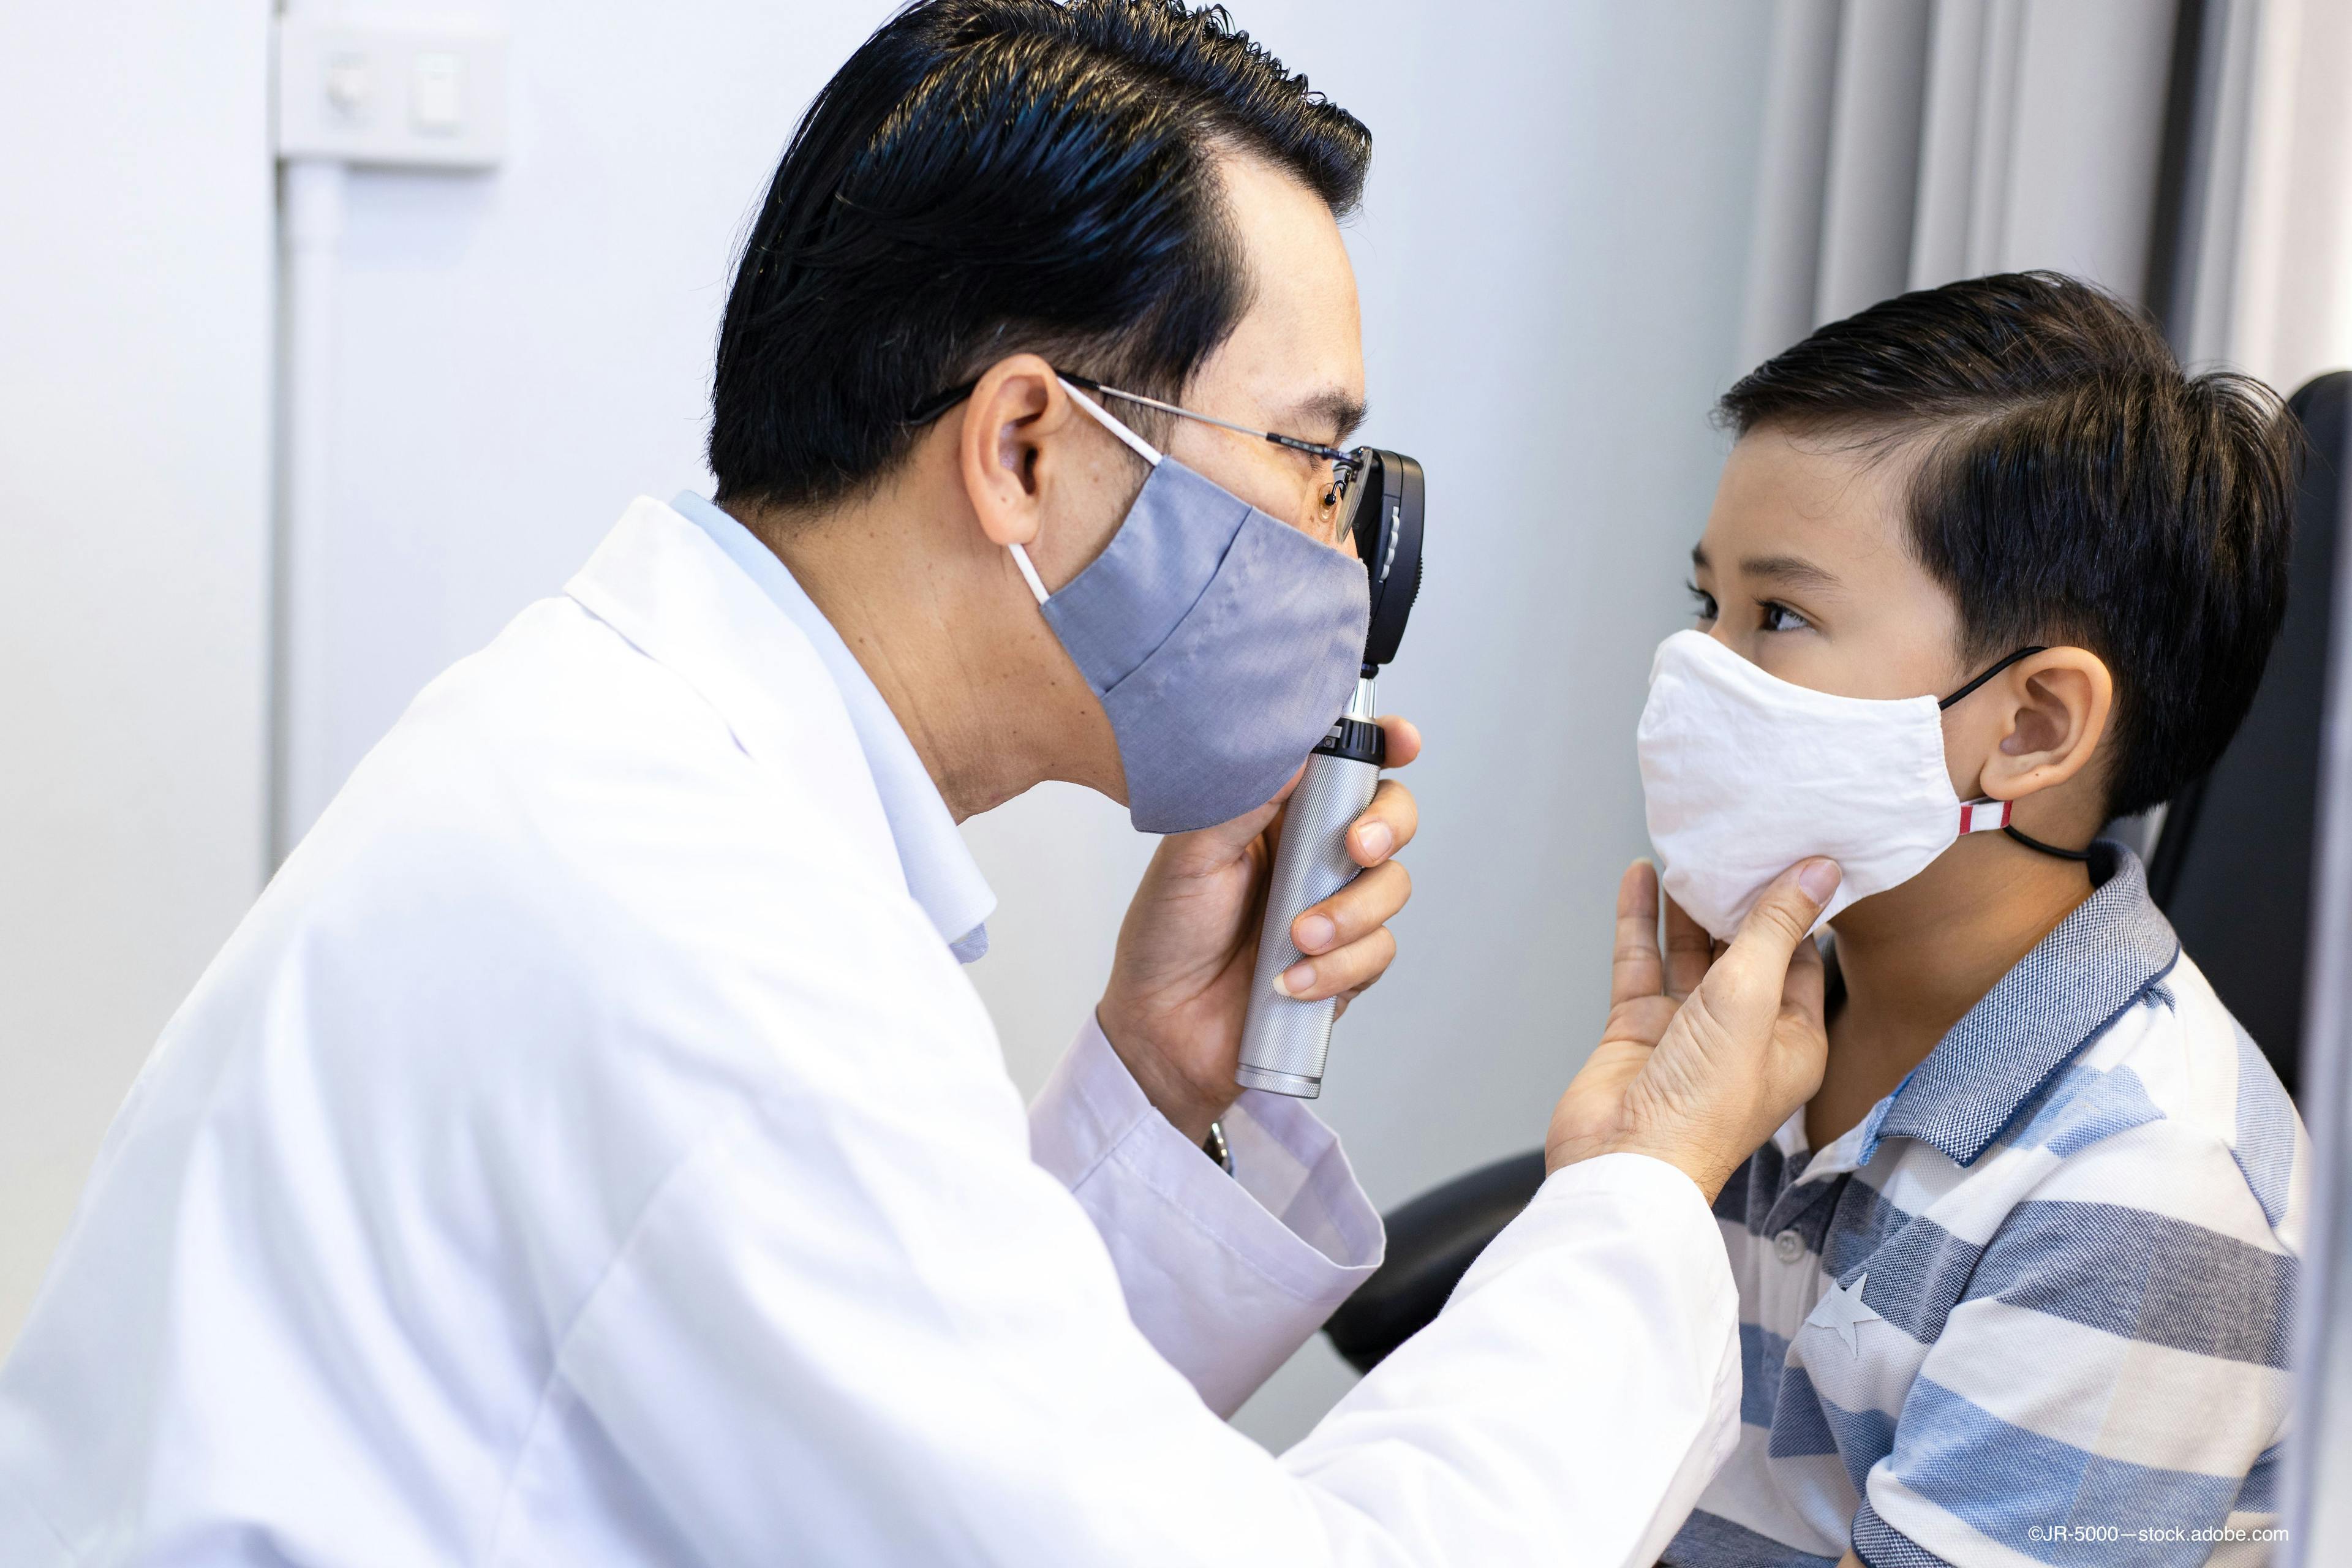 Study investigates influence of telemedicine on pediatric ophthalmic visits